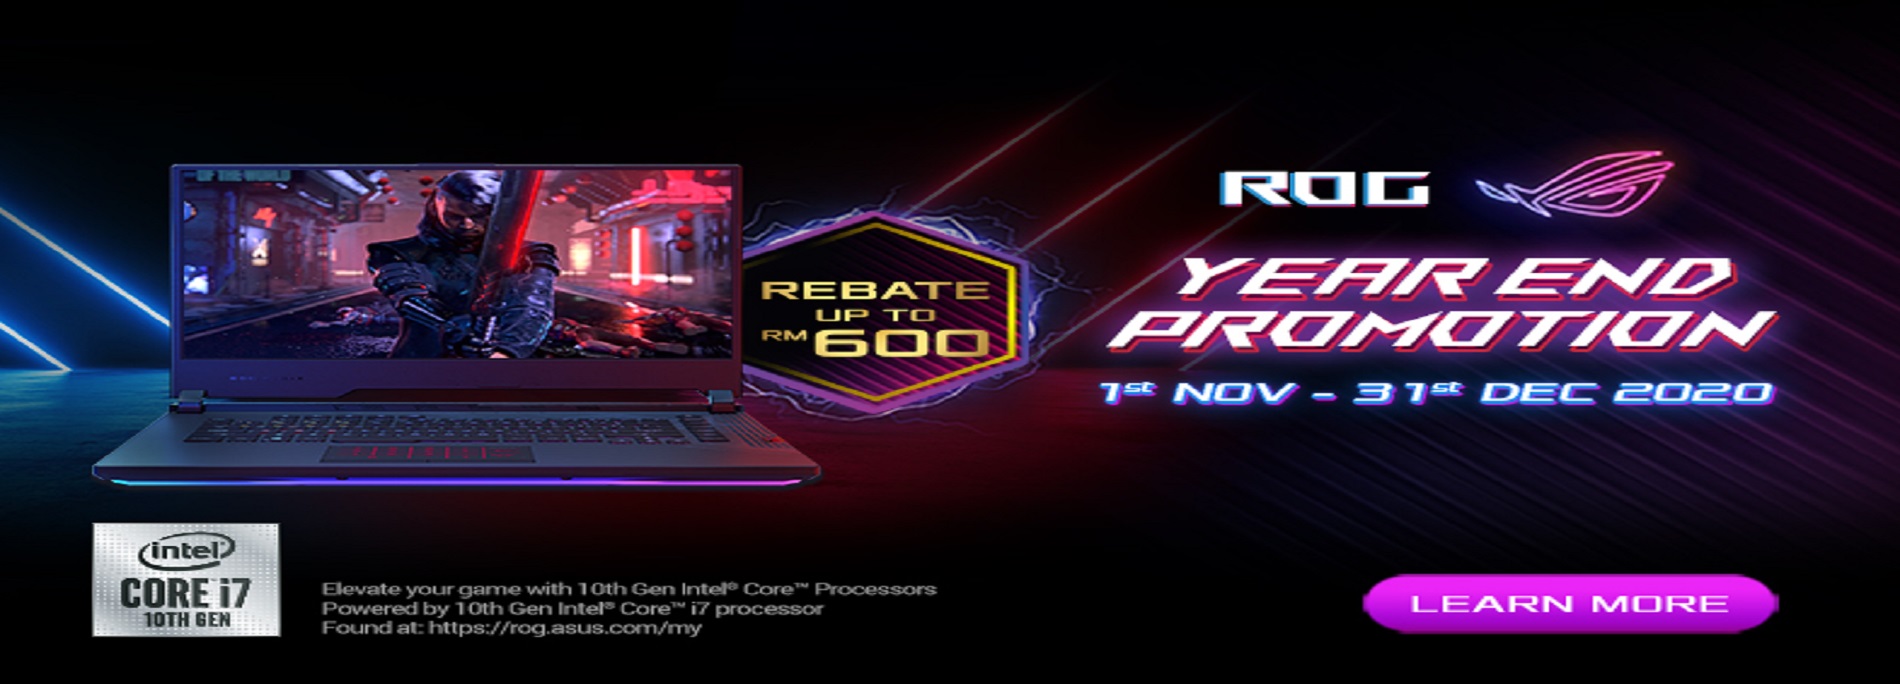 Get up to RM600 off on ROG STRIX series Laptops!